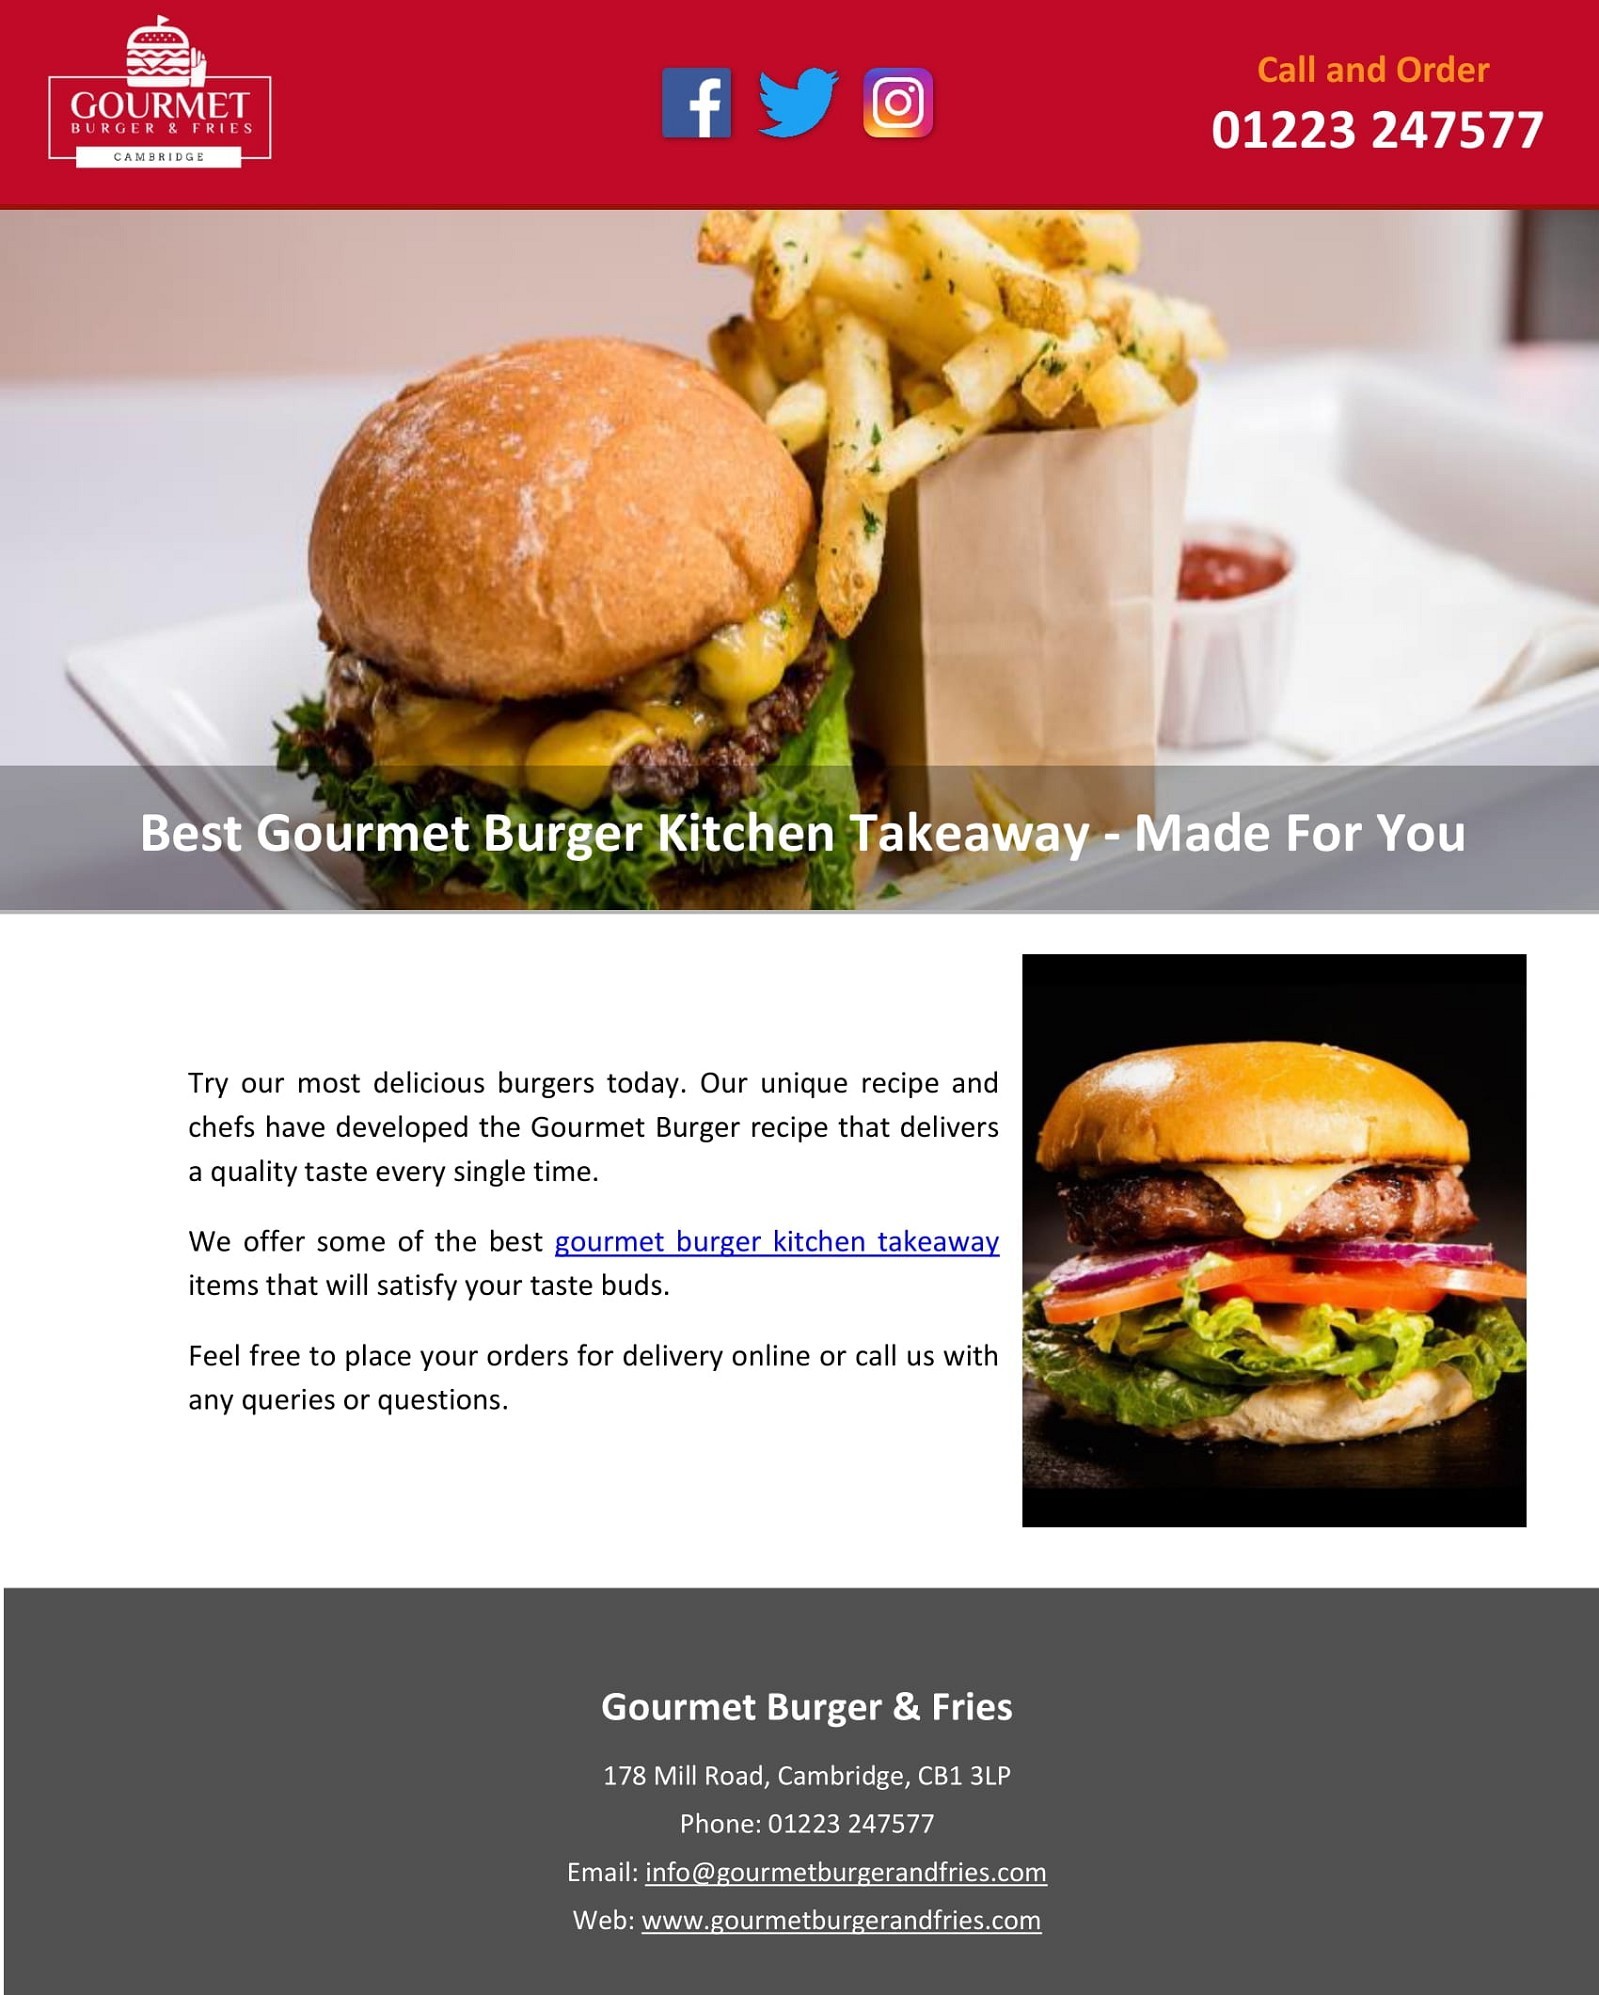 Best Gourmet Burger Kitchen Takeaway - Made For You